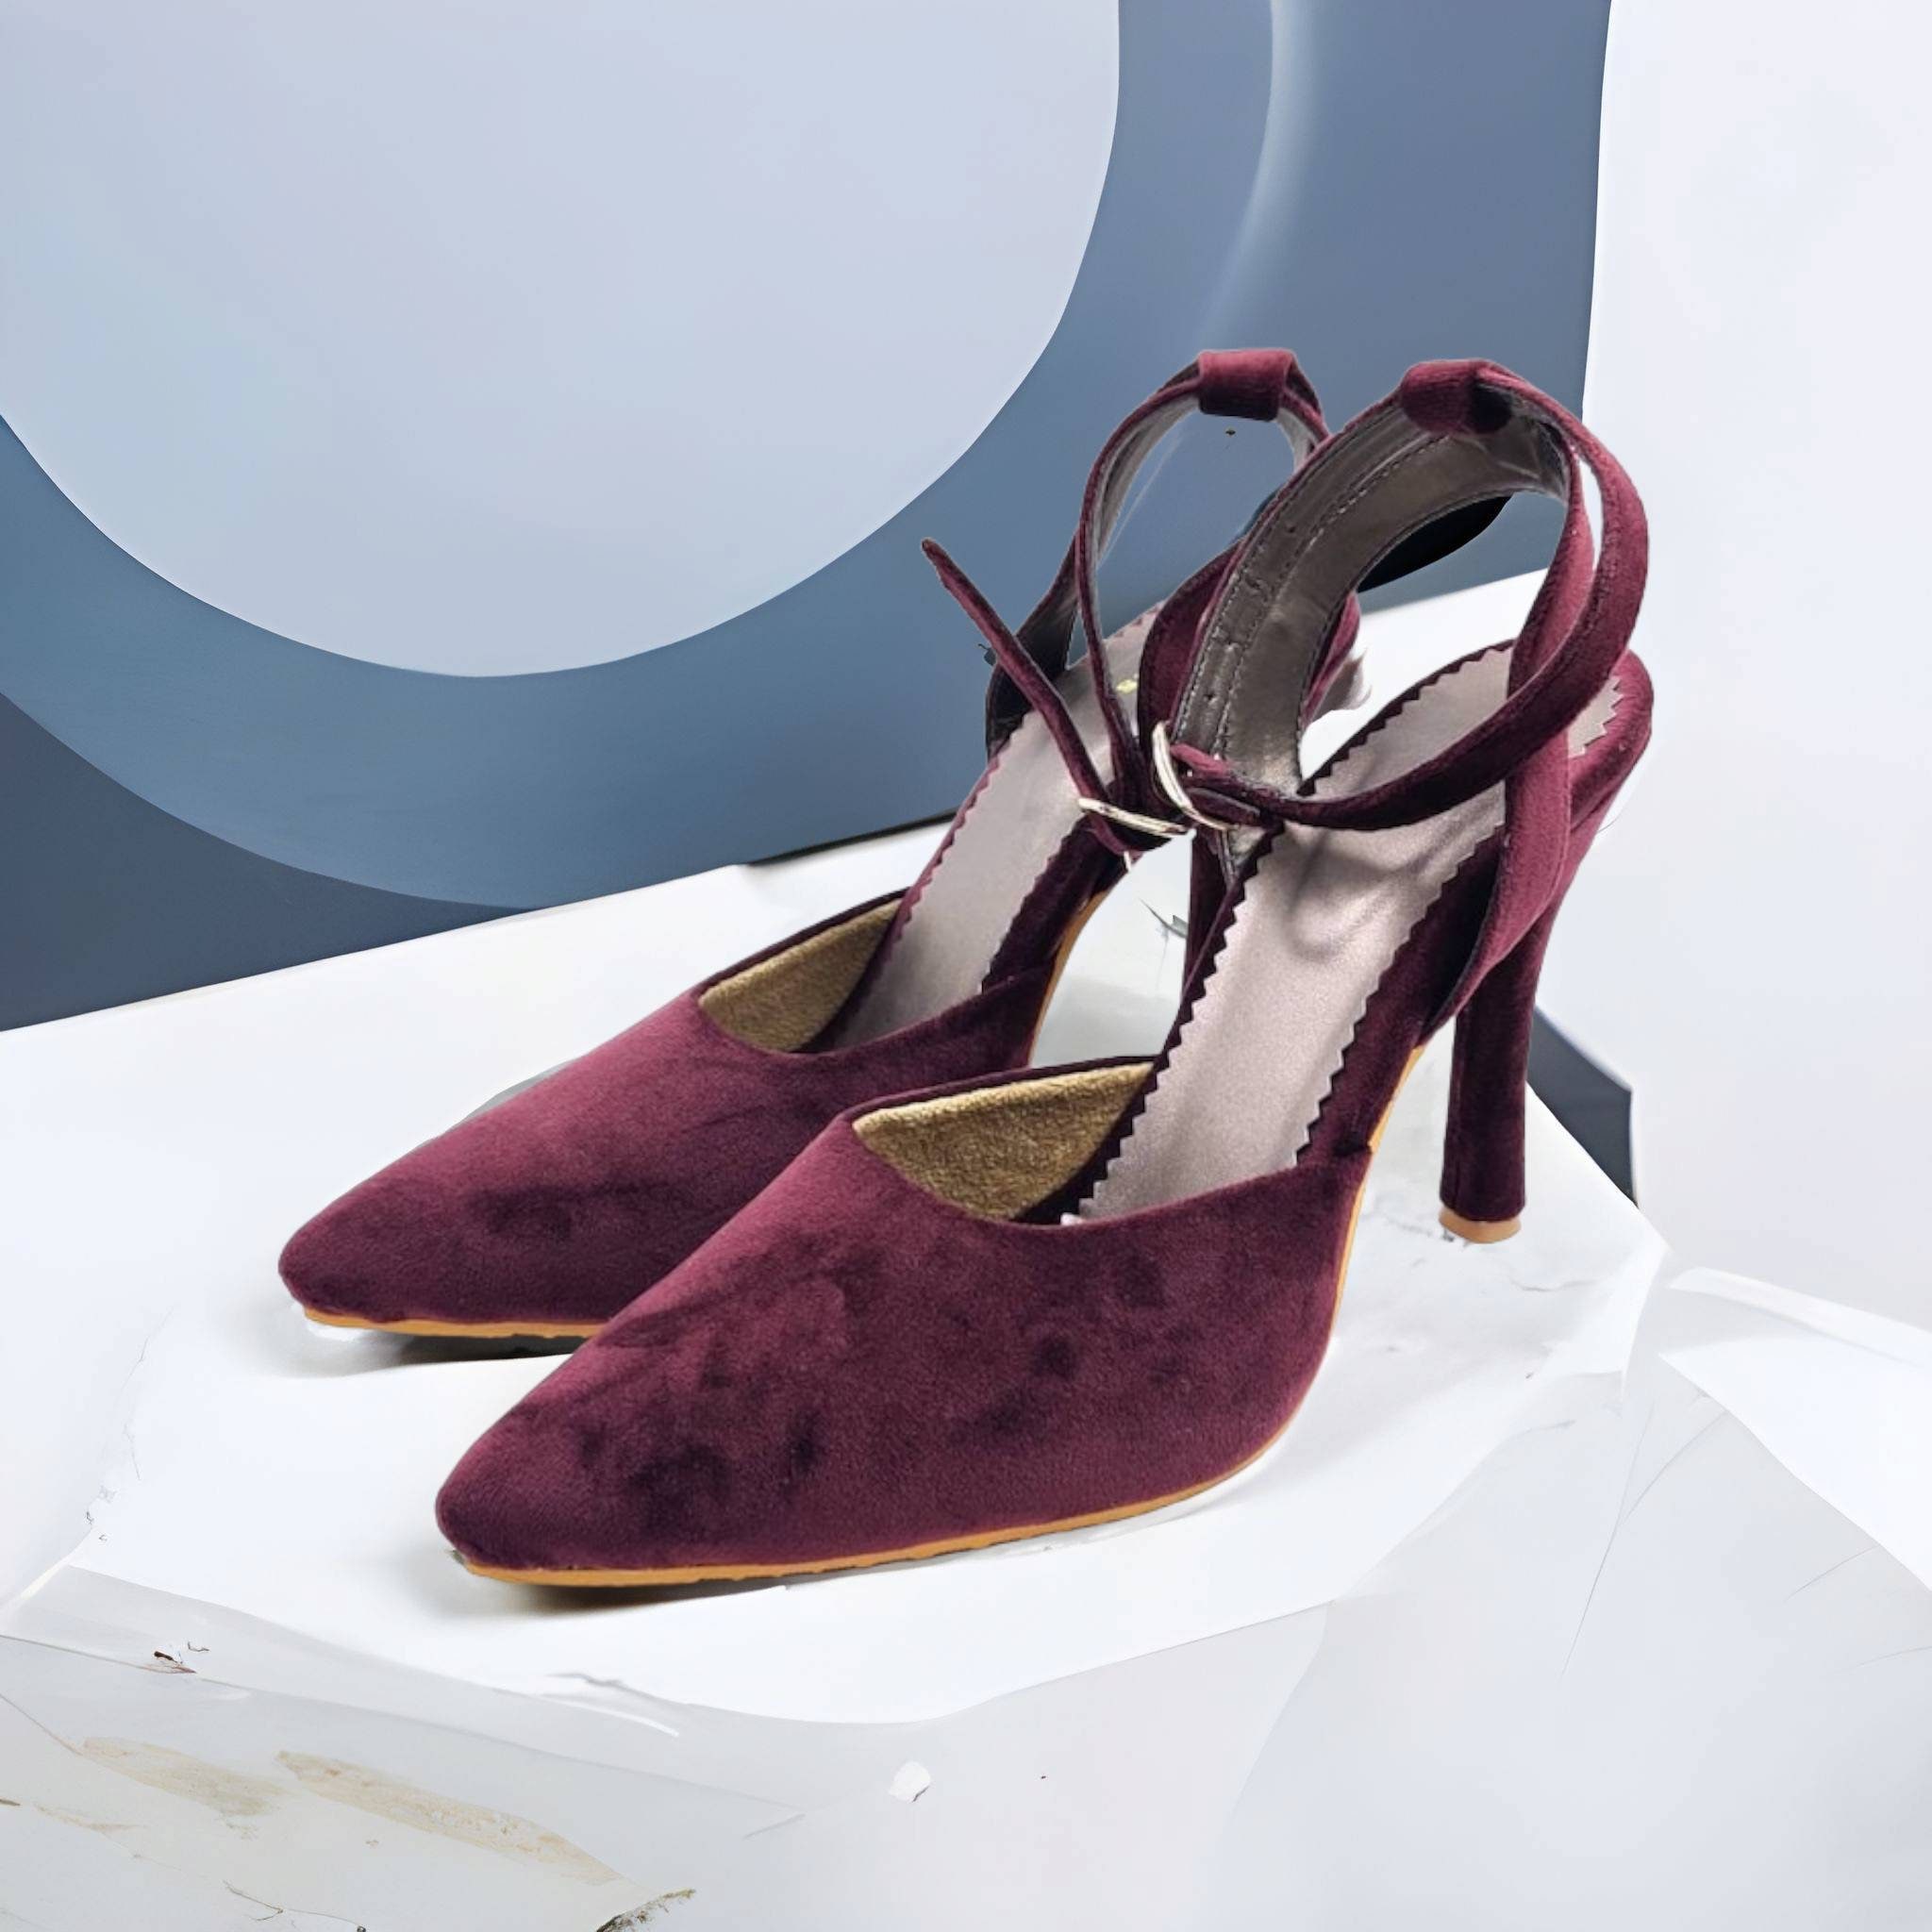 Glamorous Burgundy Barely There Block Heeled Sandals | ASOS